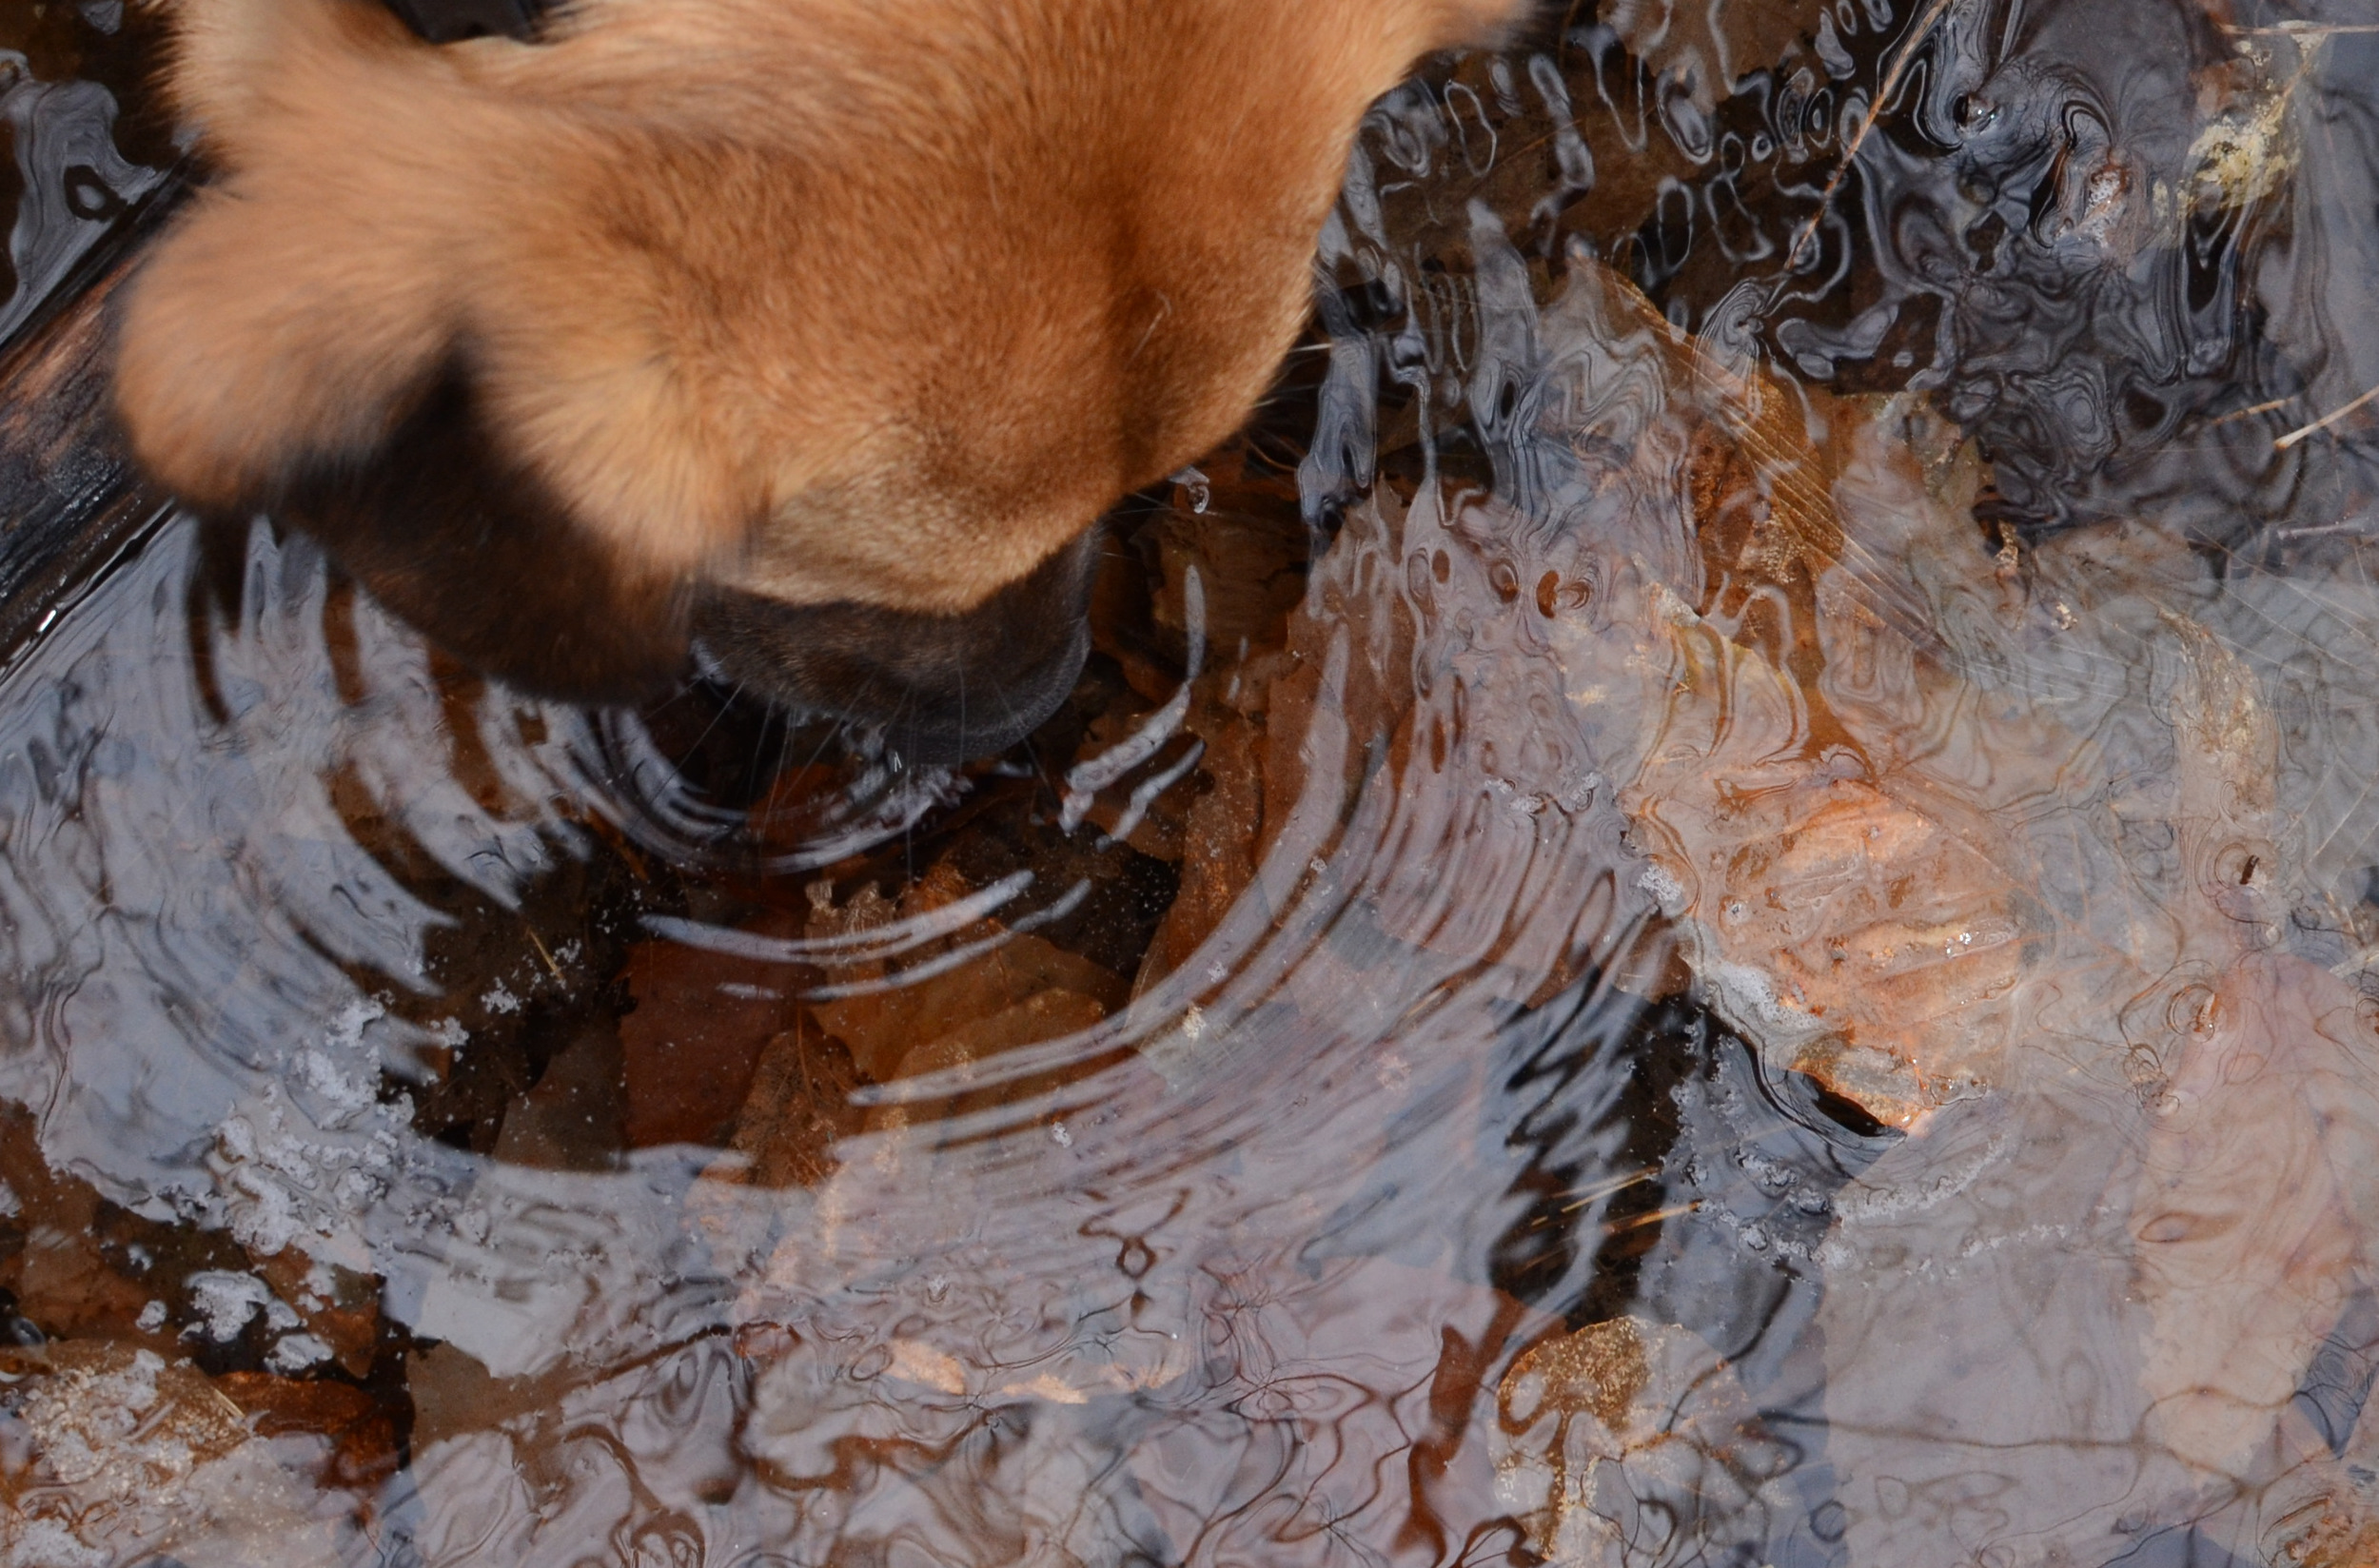 Dog sipping water  - Christina Rosalie